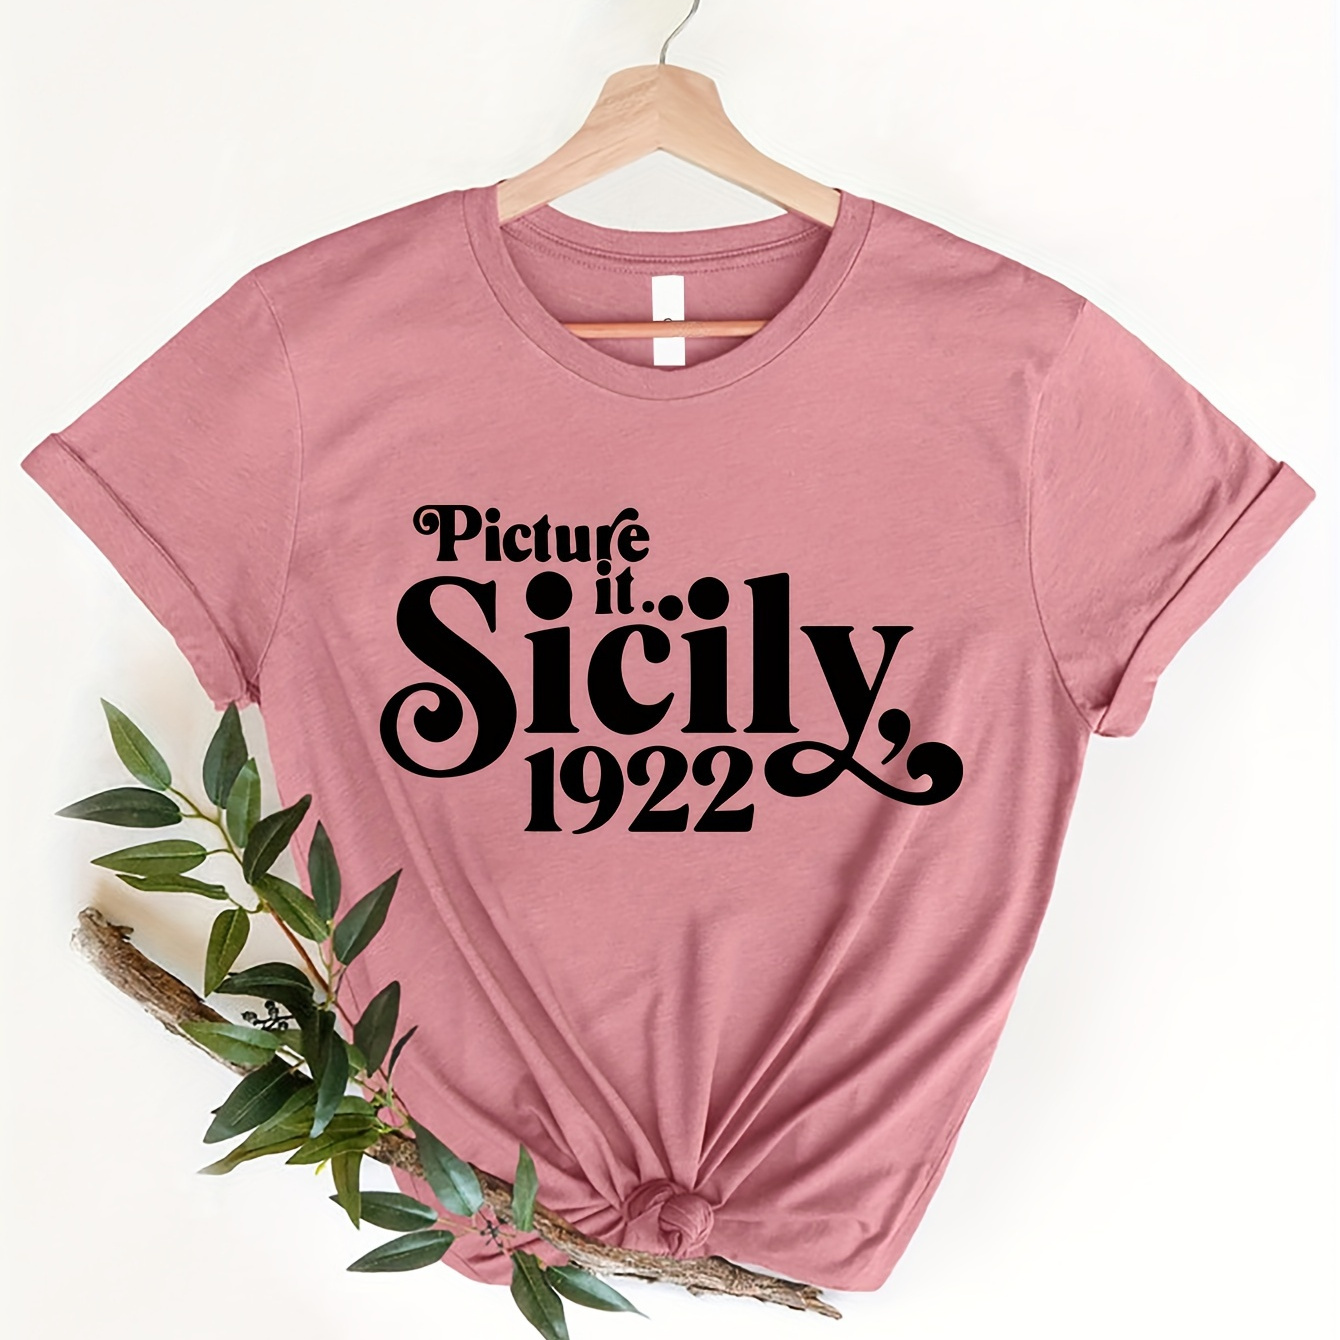 

Sicily 1922 Print T-shirt, Short Sleeve Casual Top For Summer & Spring, Women's Clothing